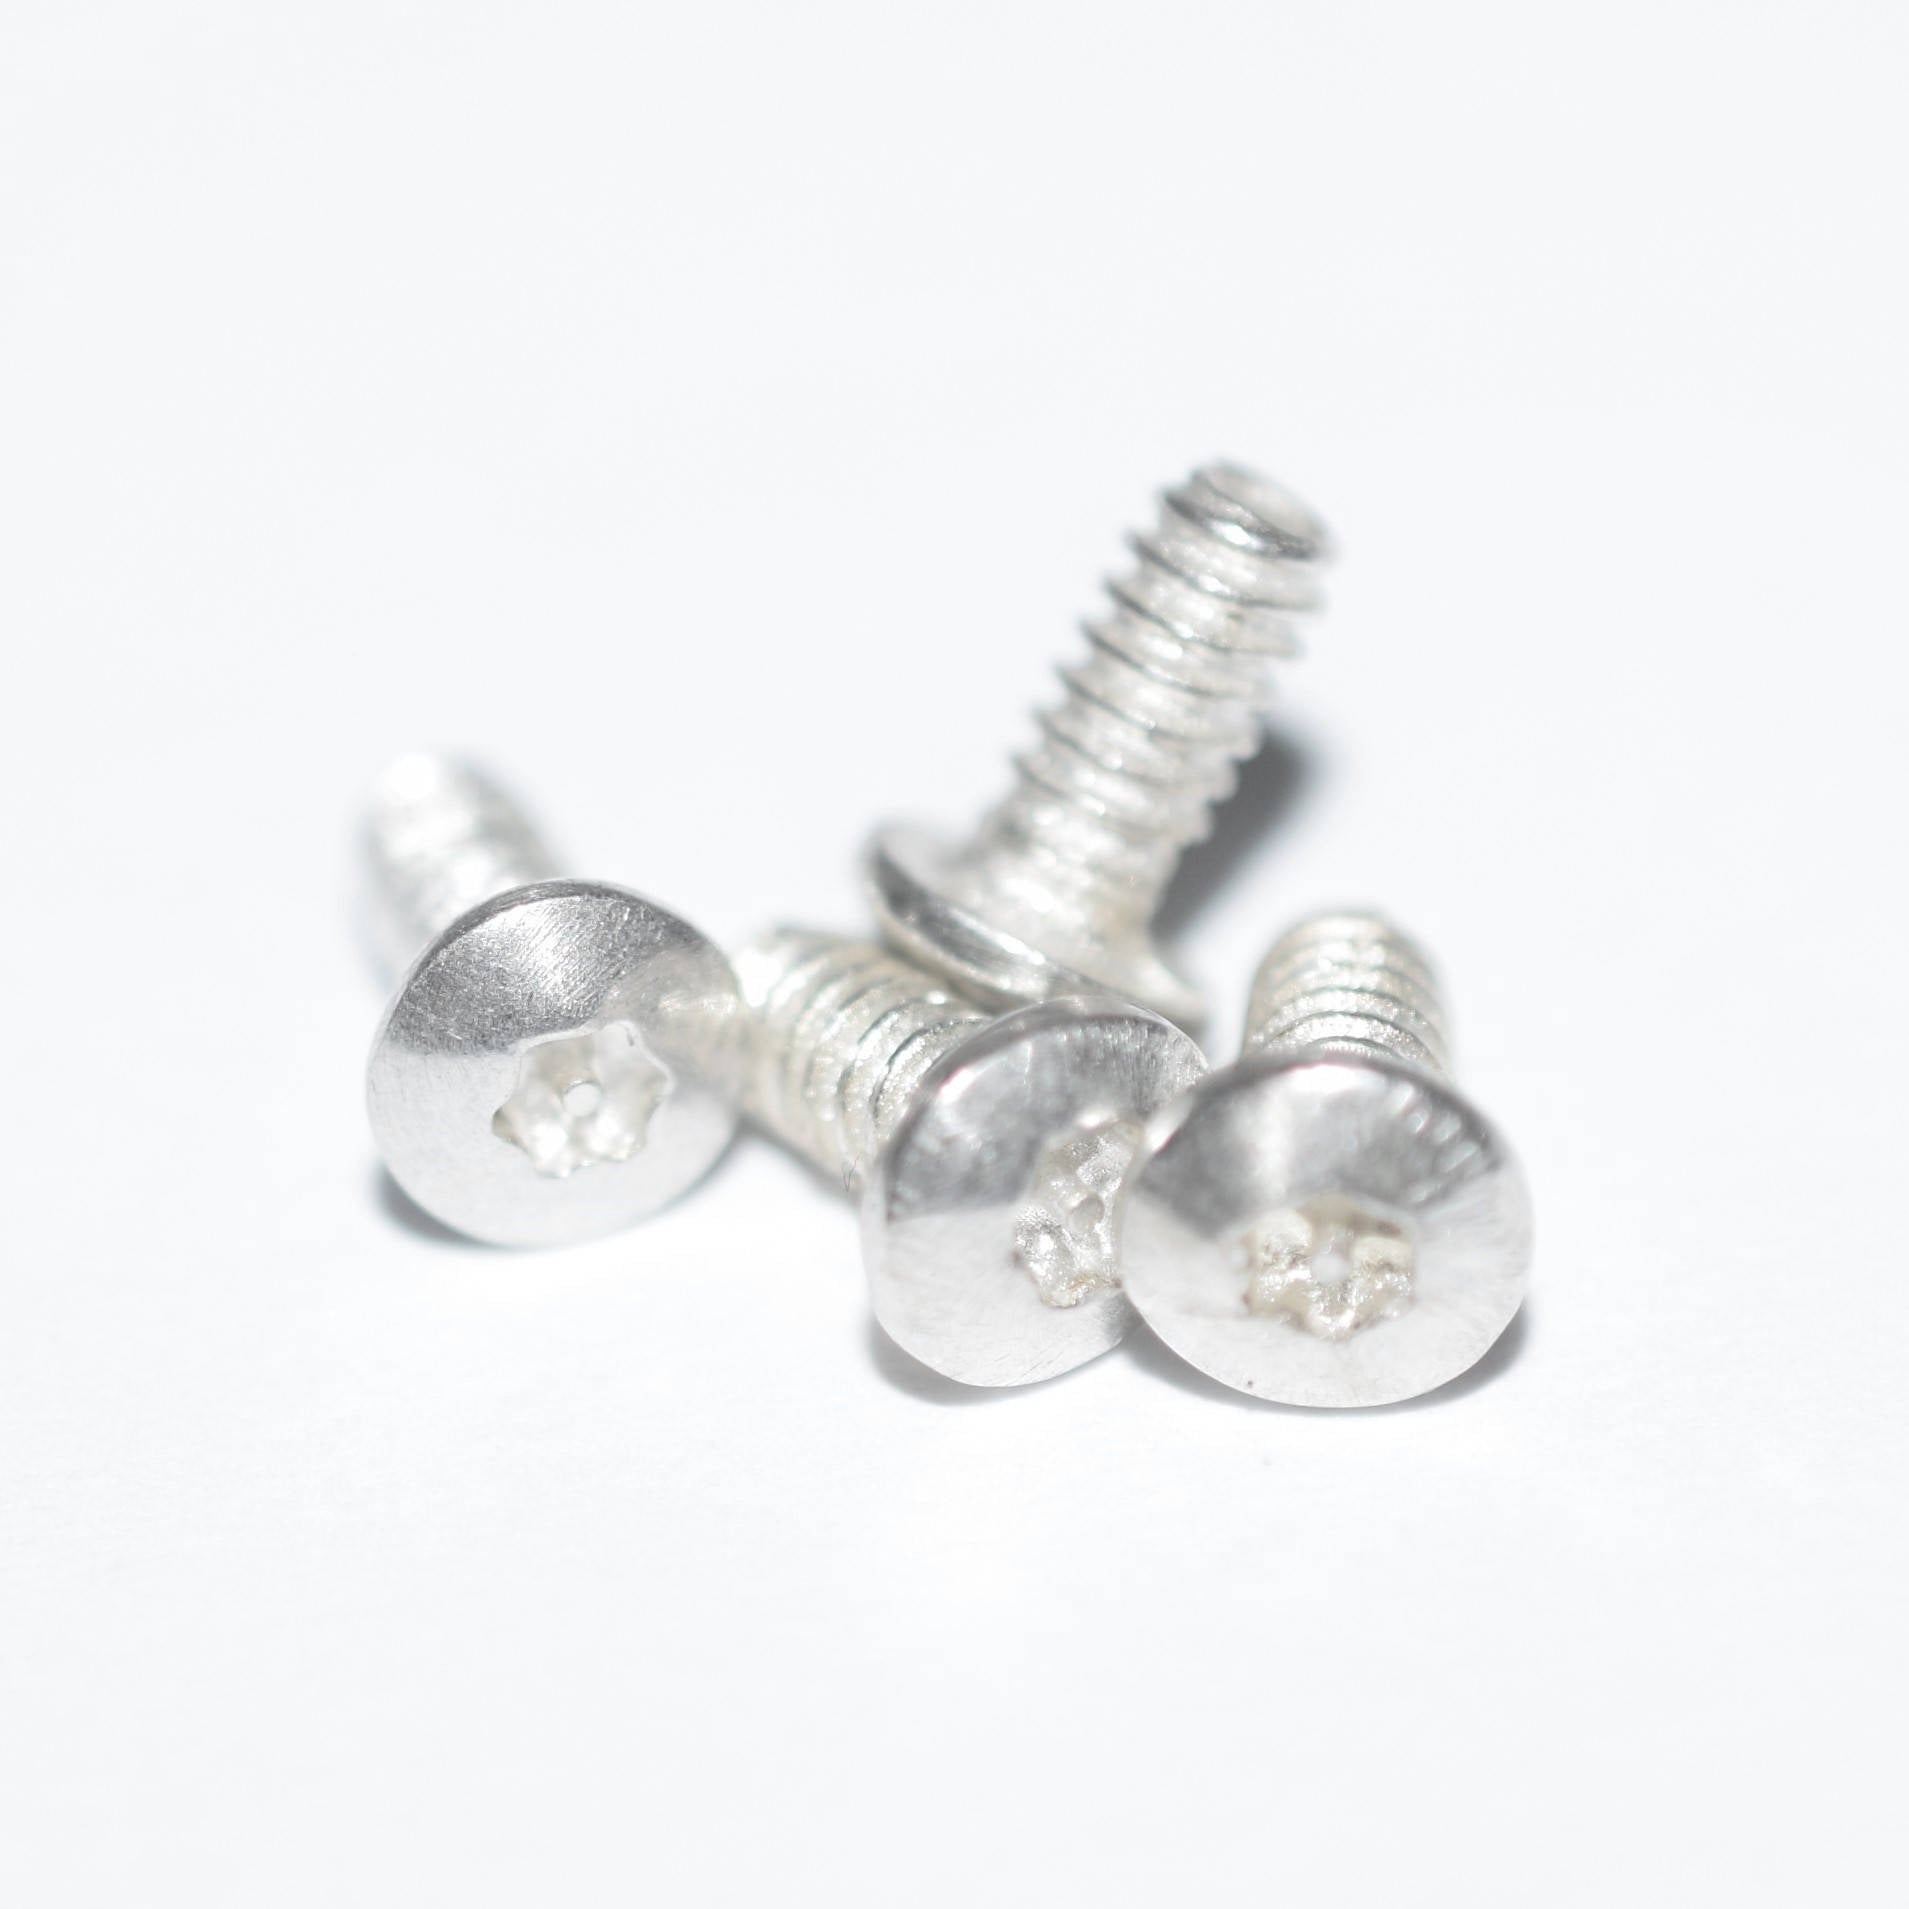 Replacement Screw for the ToBeHis Sterling Silver Screw Security Clasp